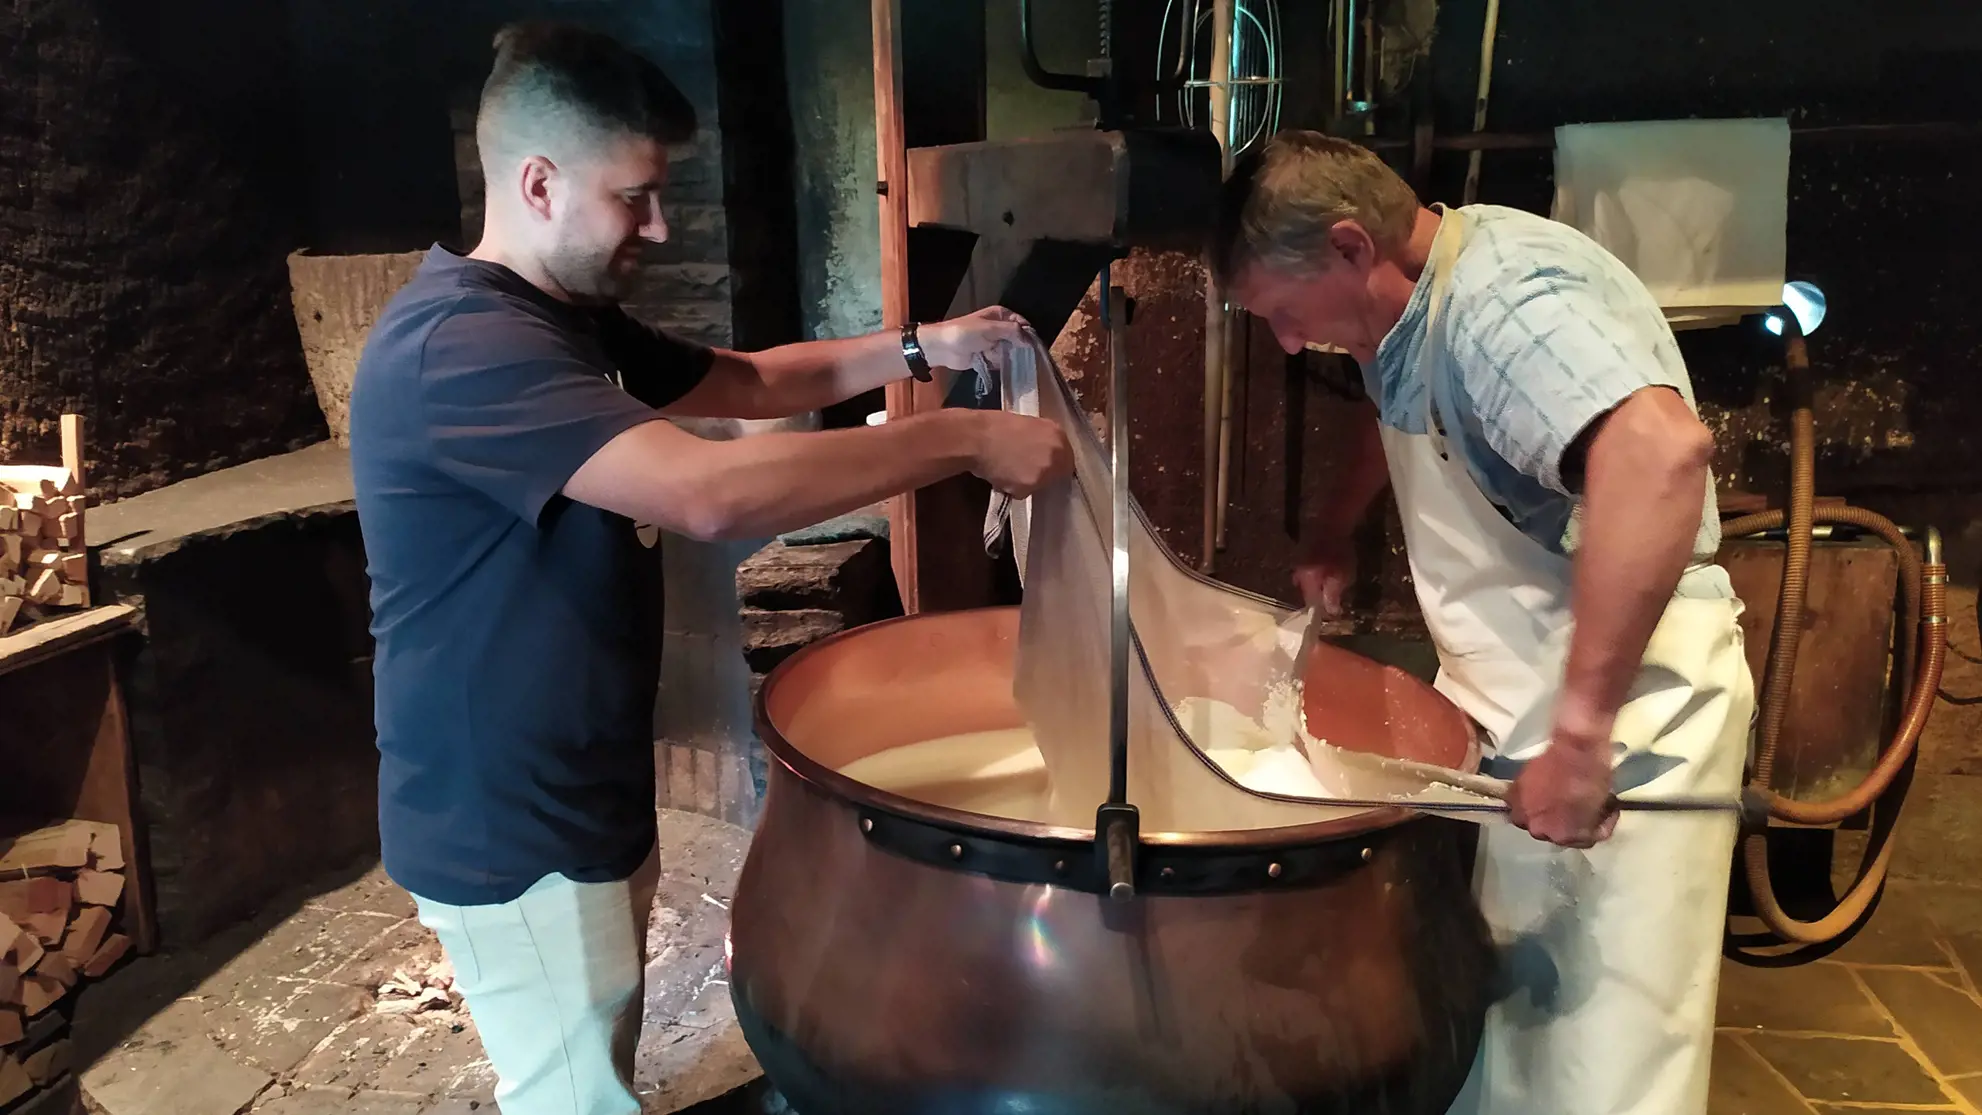 Visit to a swiss cheese factory with large cauldrons full of cheese